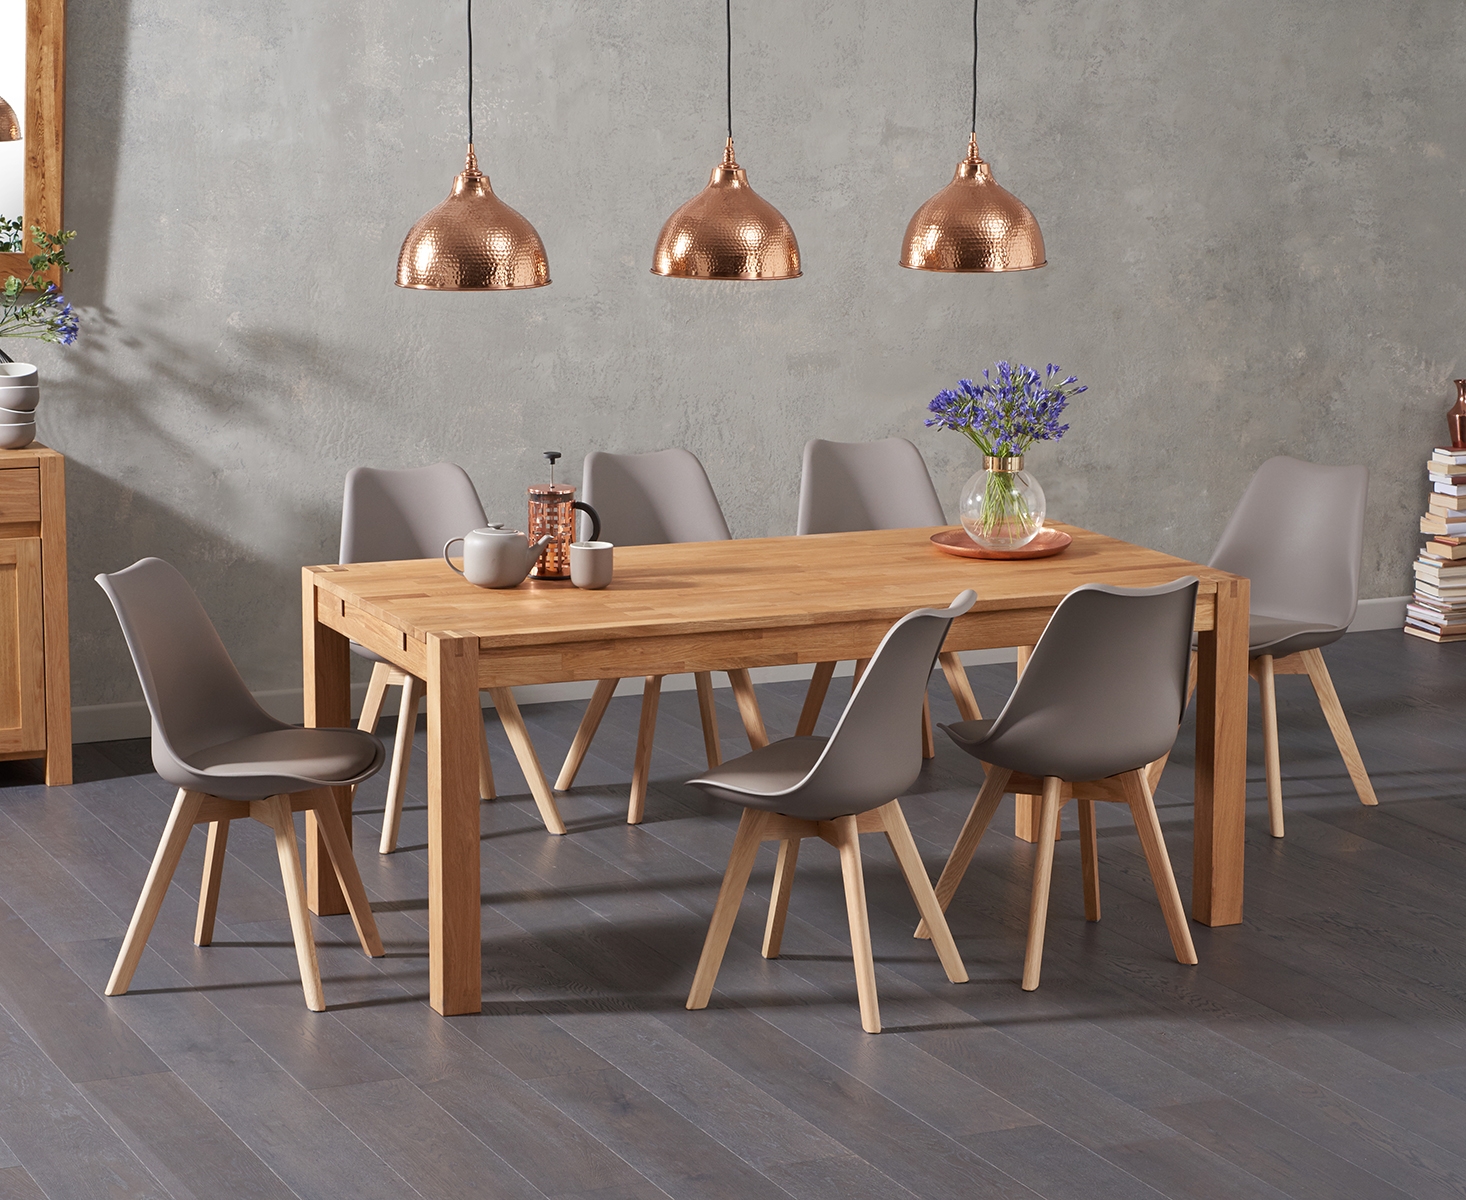 Verona 180cm Solid Oak Dining Table With 6 Mink Orson Faux Leather Chairs